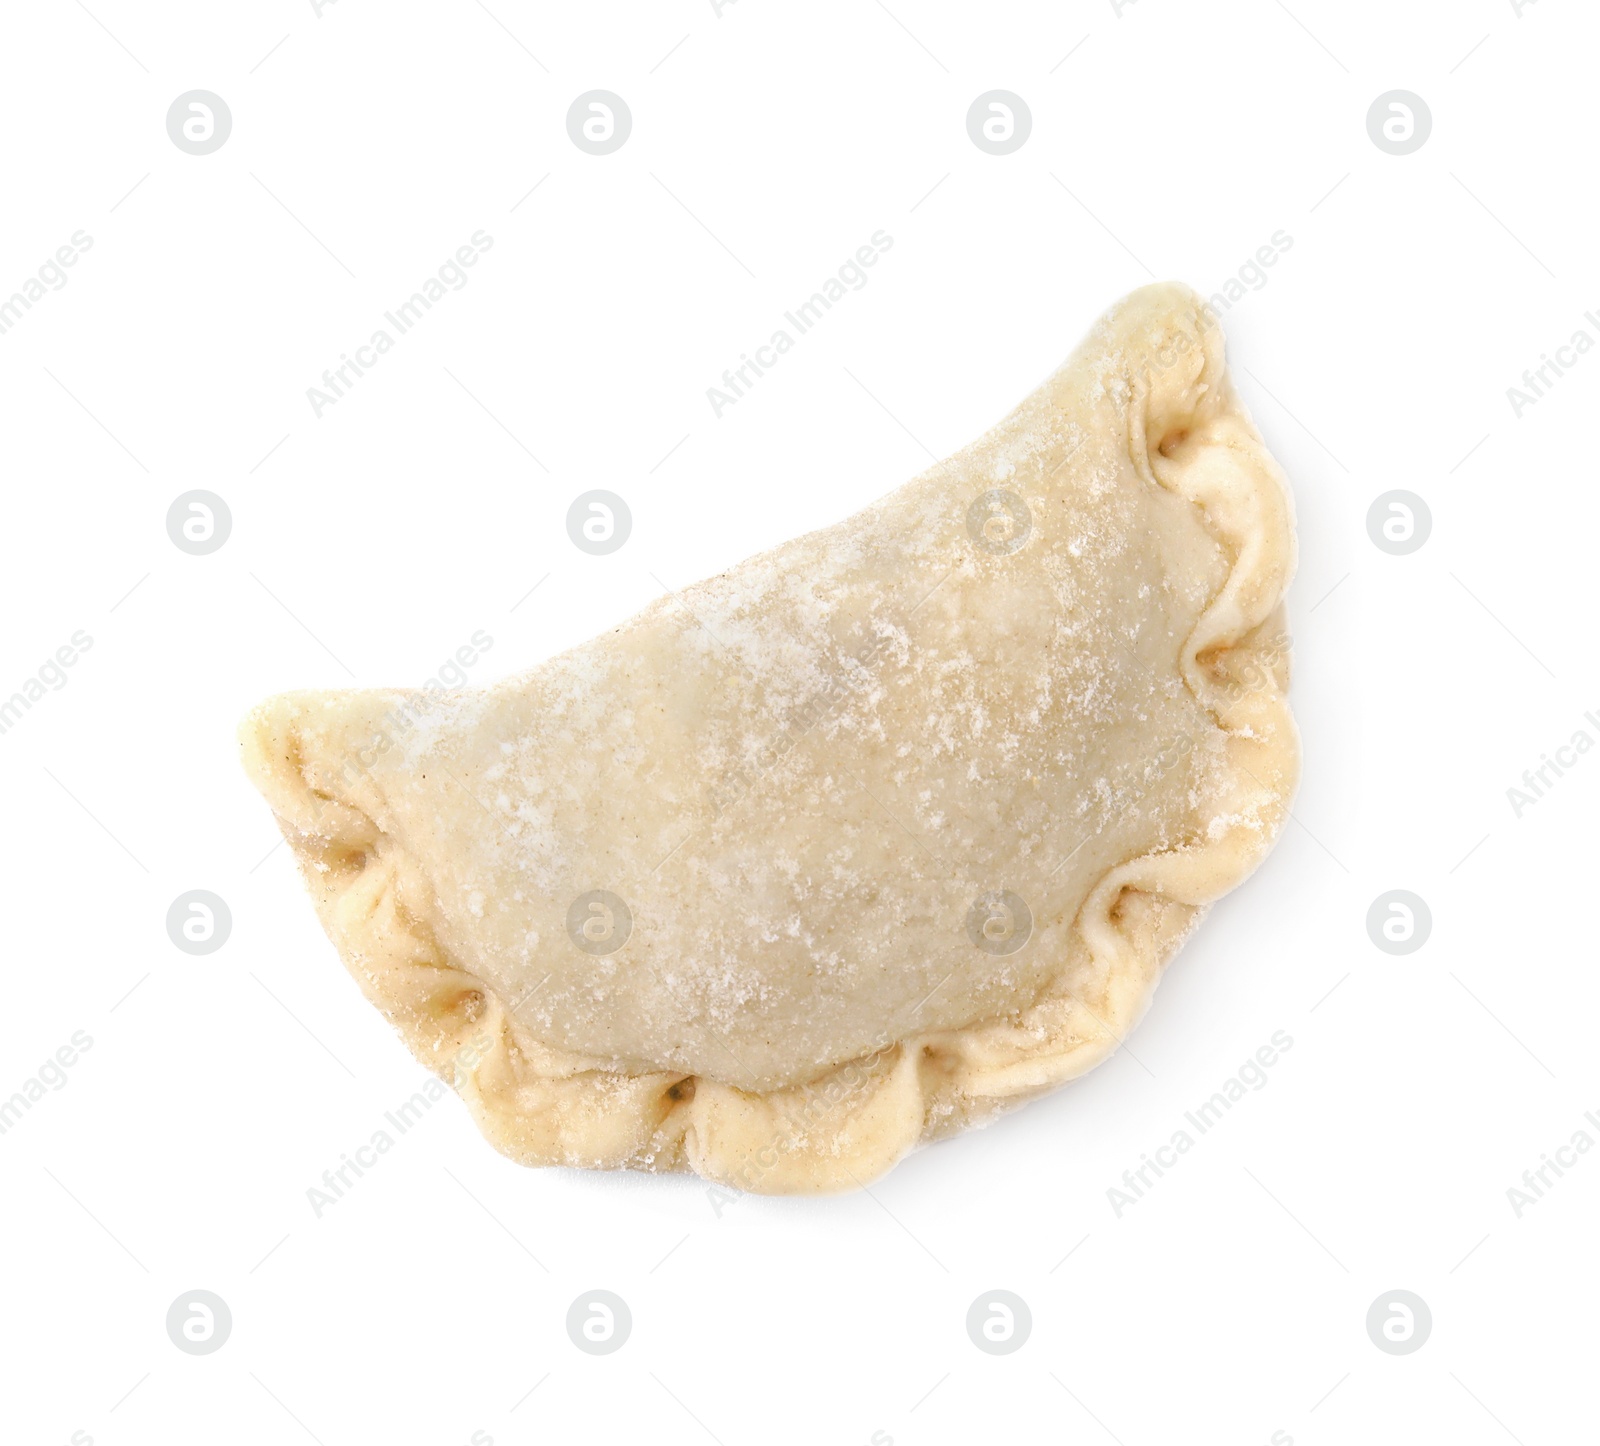 Photo of One raw dumpling (varenyk) isolated on white, top view